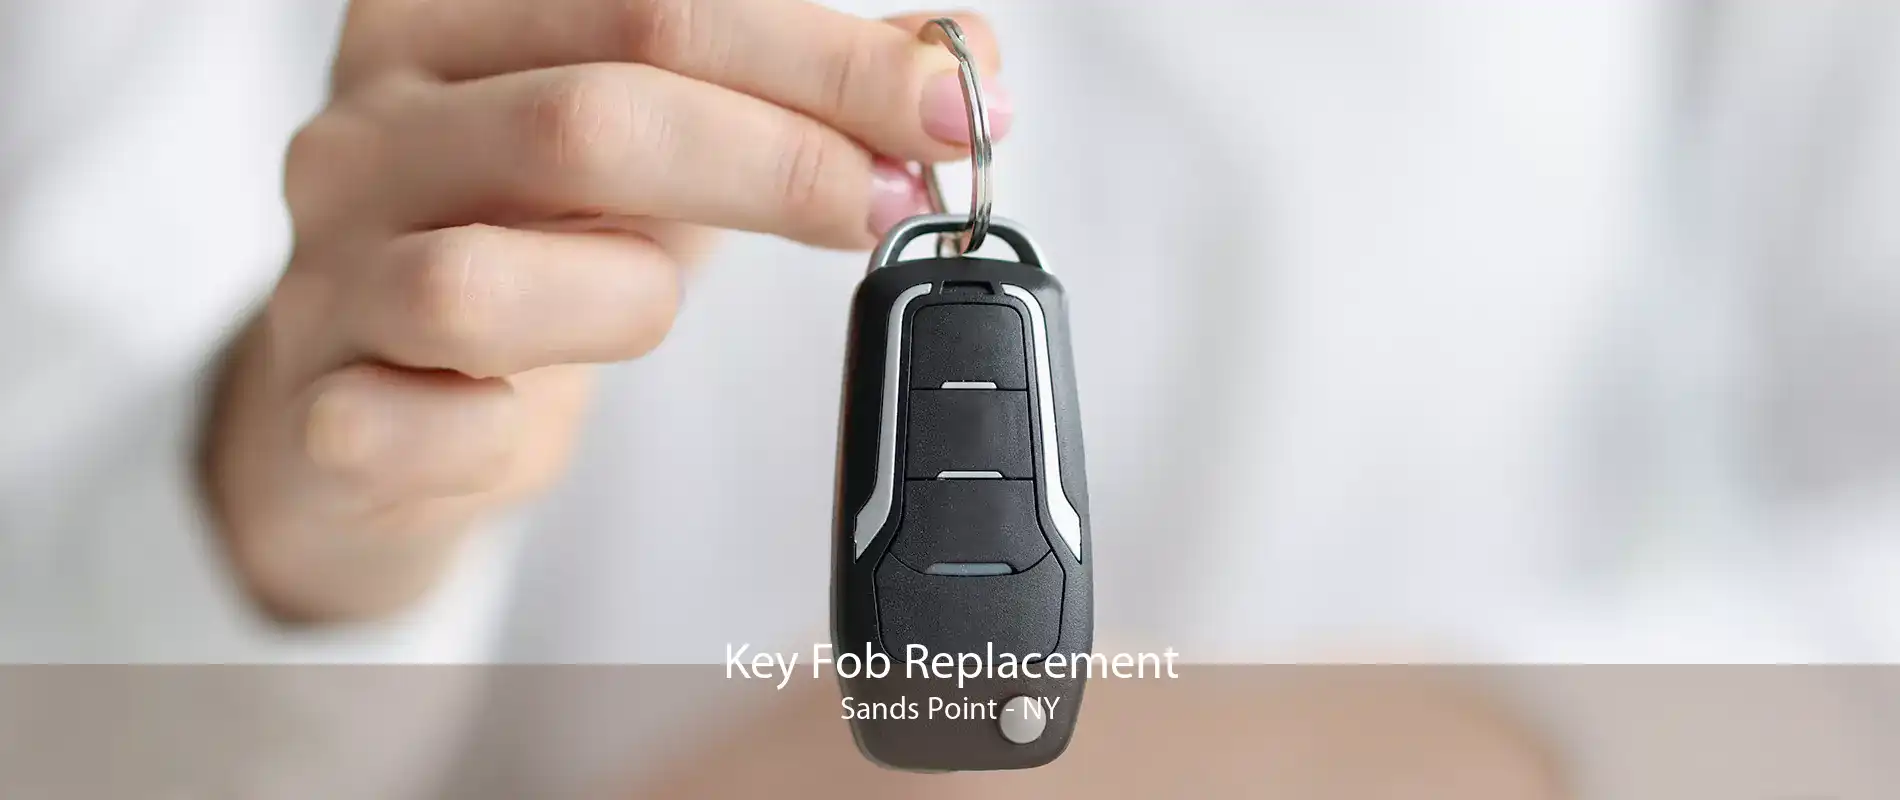 Key Fob Replacement Sands Point - NY